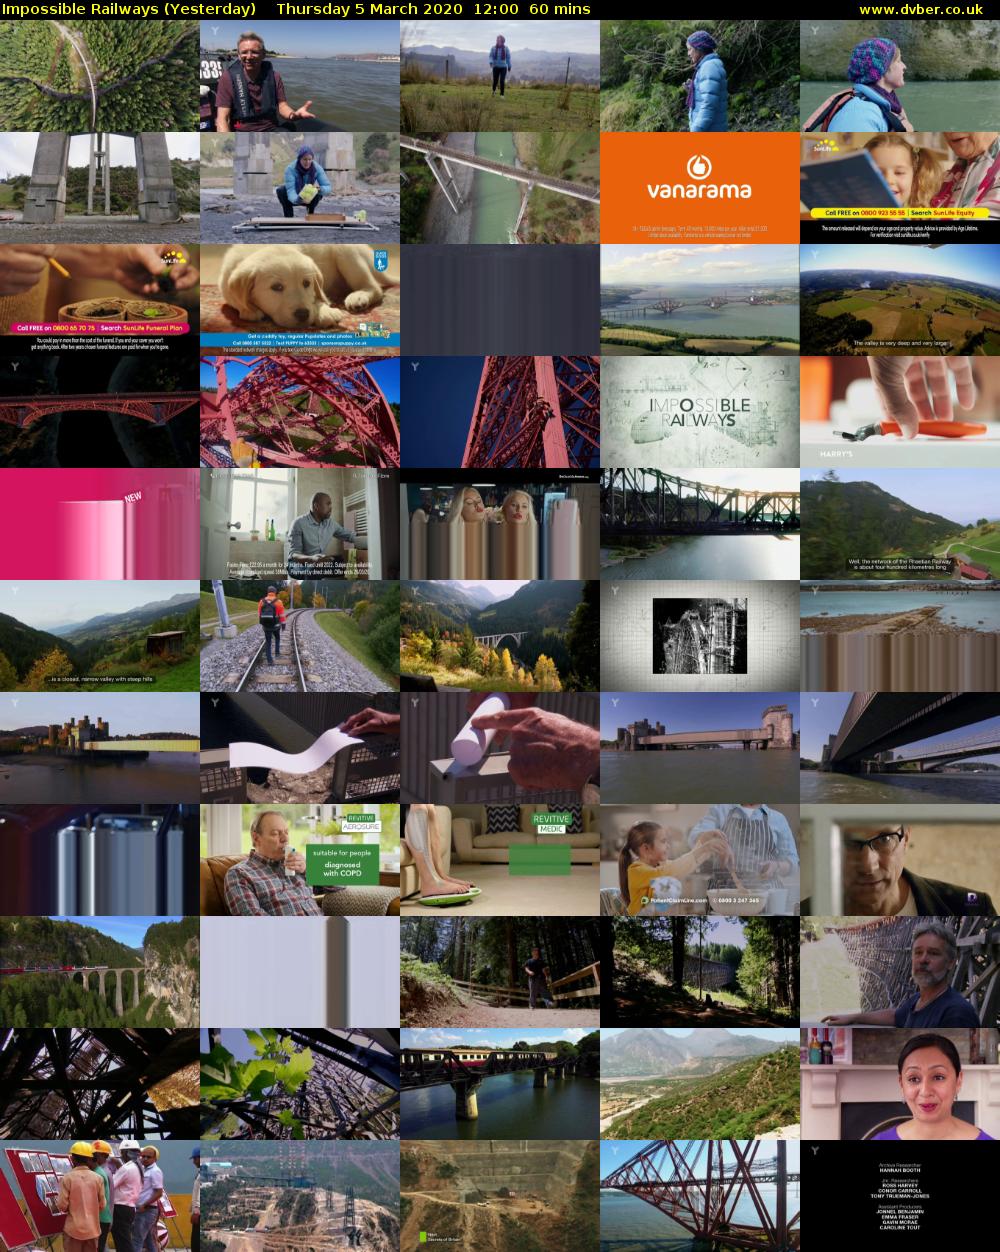 Impossible Railways (Yesterday) Thursday 5 March 2020 12:00 - 13:00